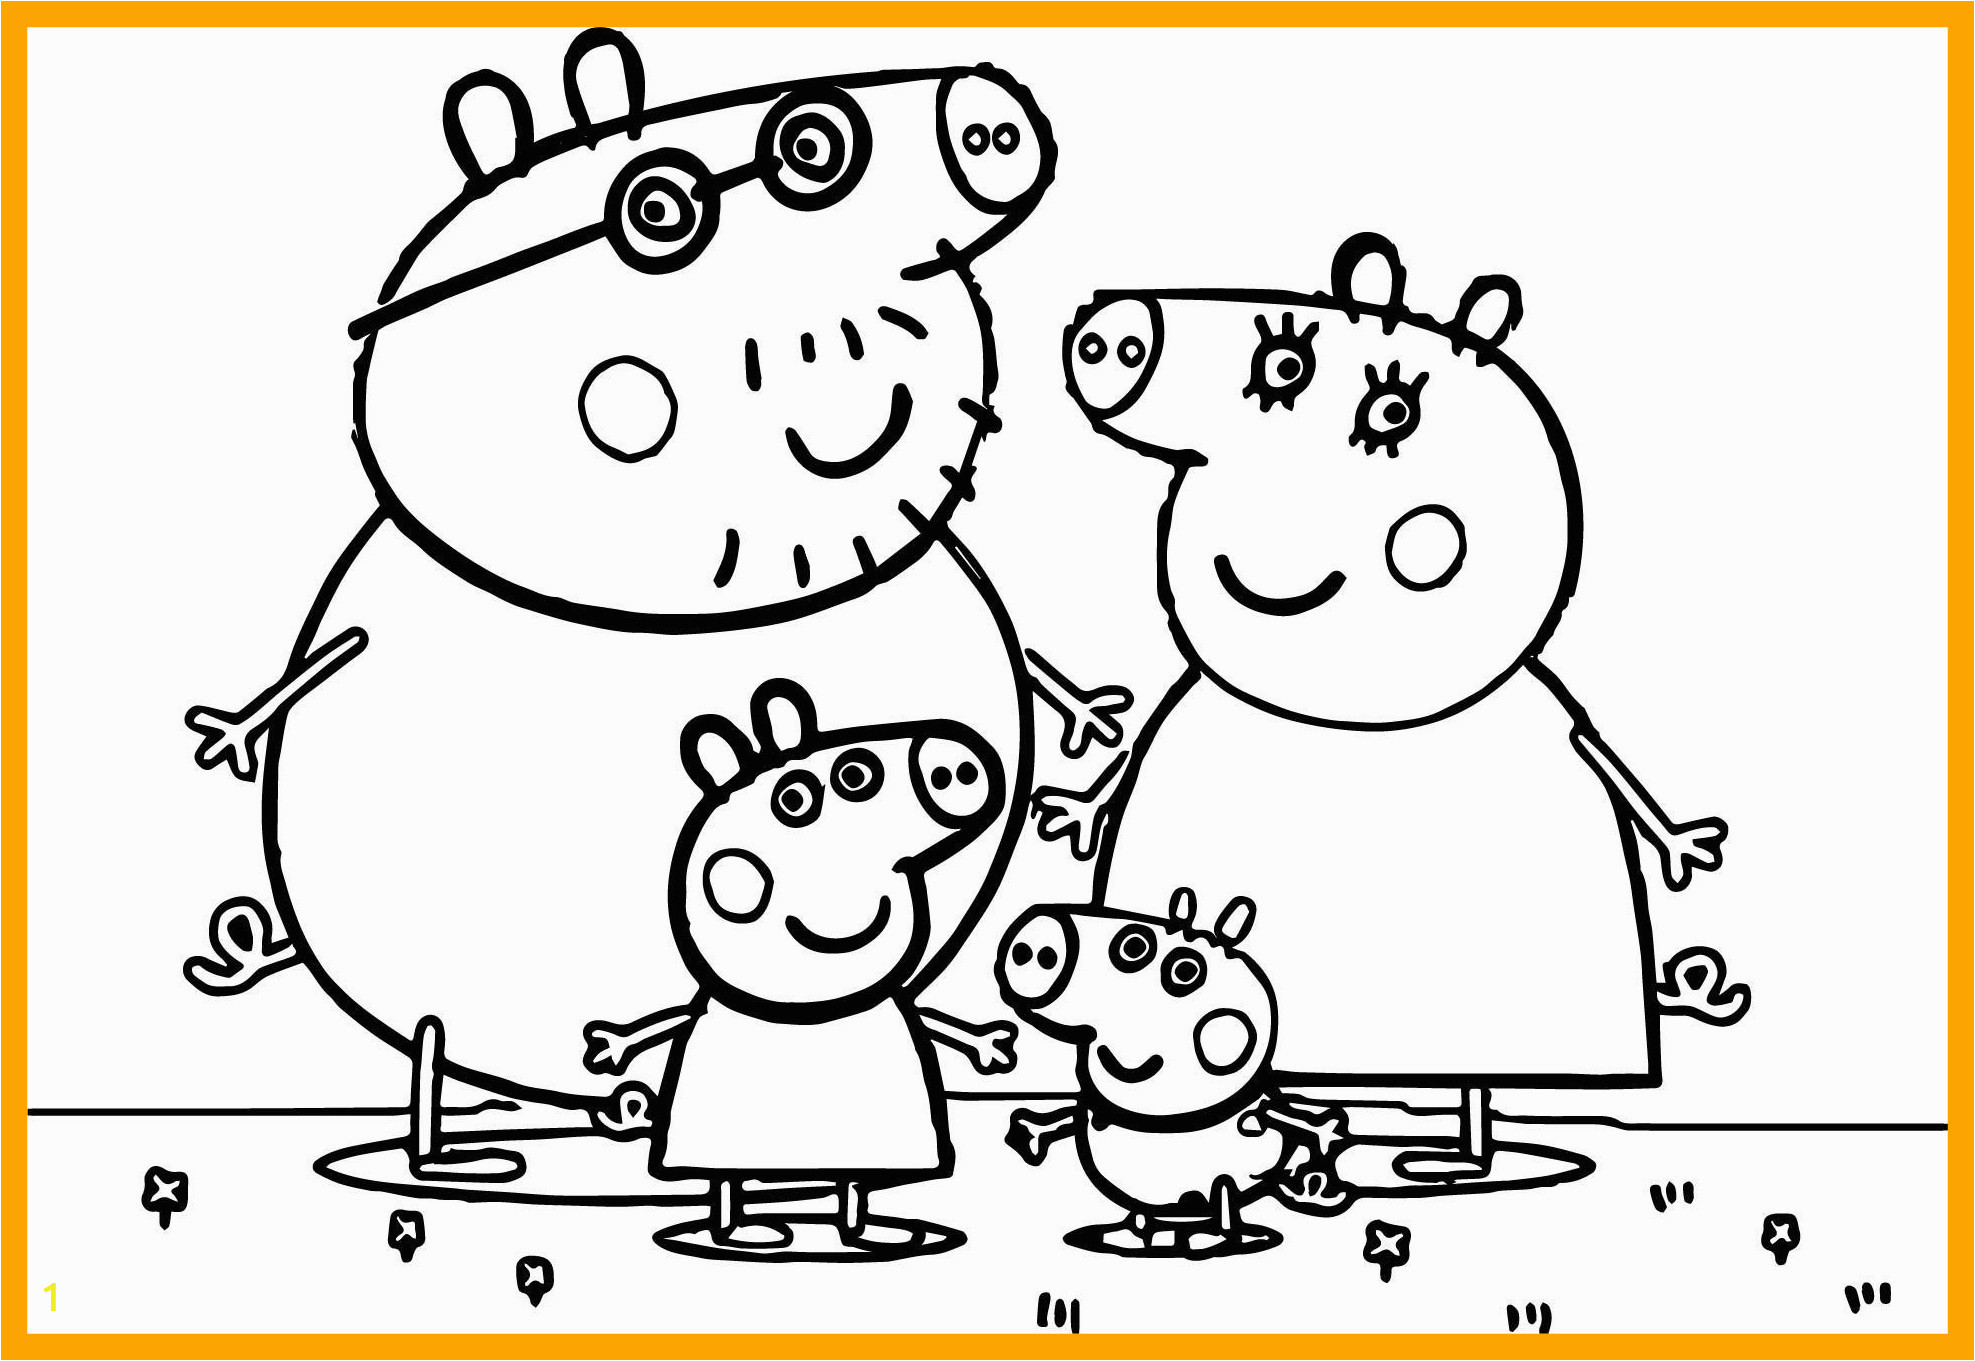 Free Printable Peppa Pig Coloring Pages Peppa Pig Coloring Pages for Kids at Getdrawings